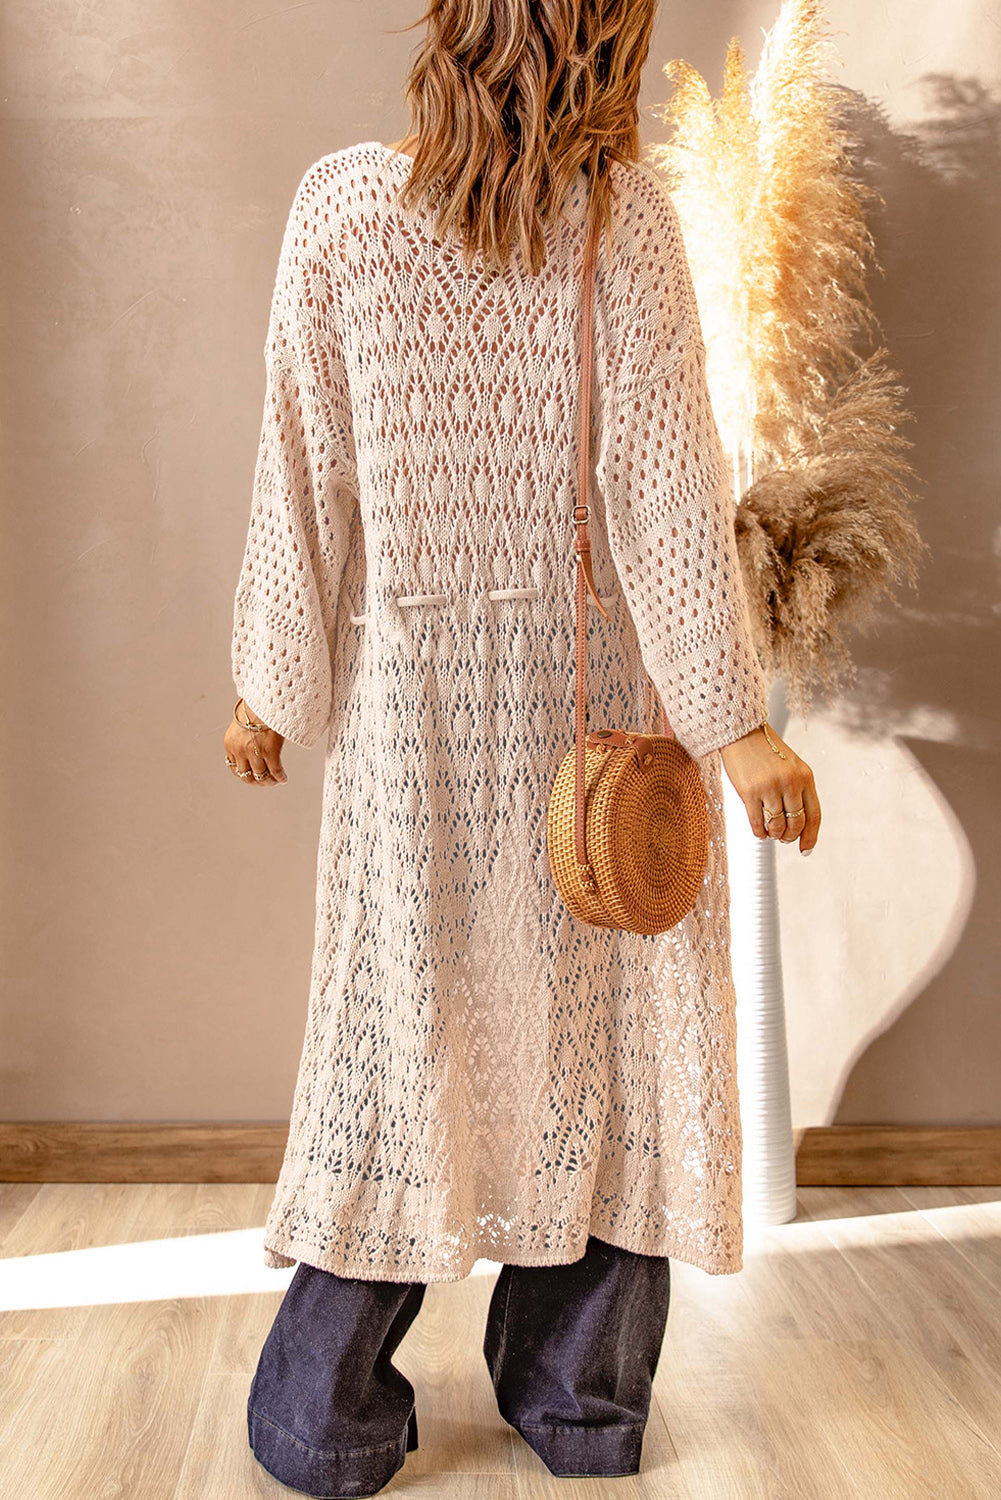 Apricot Crochet Hollow-out Long Cardigan